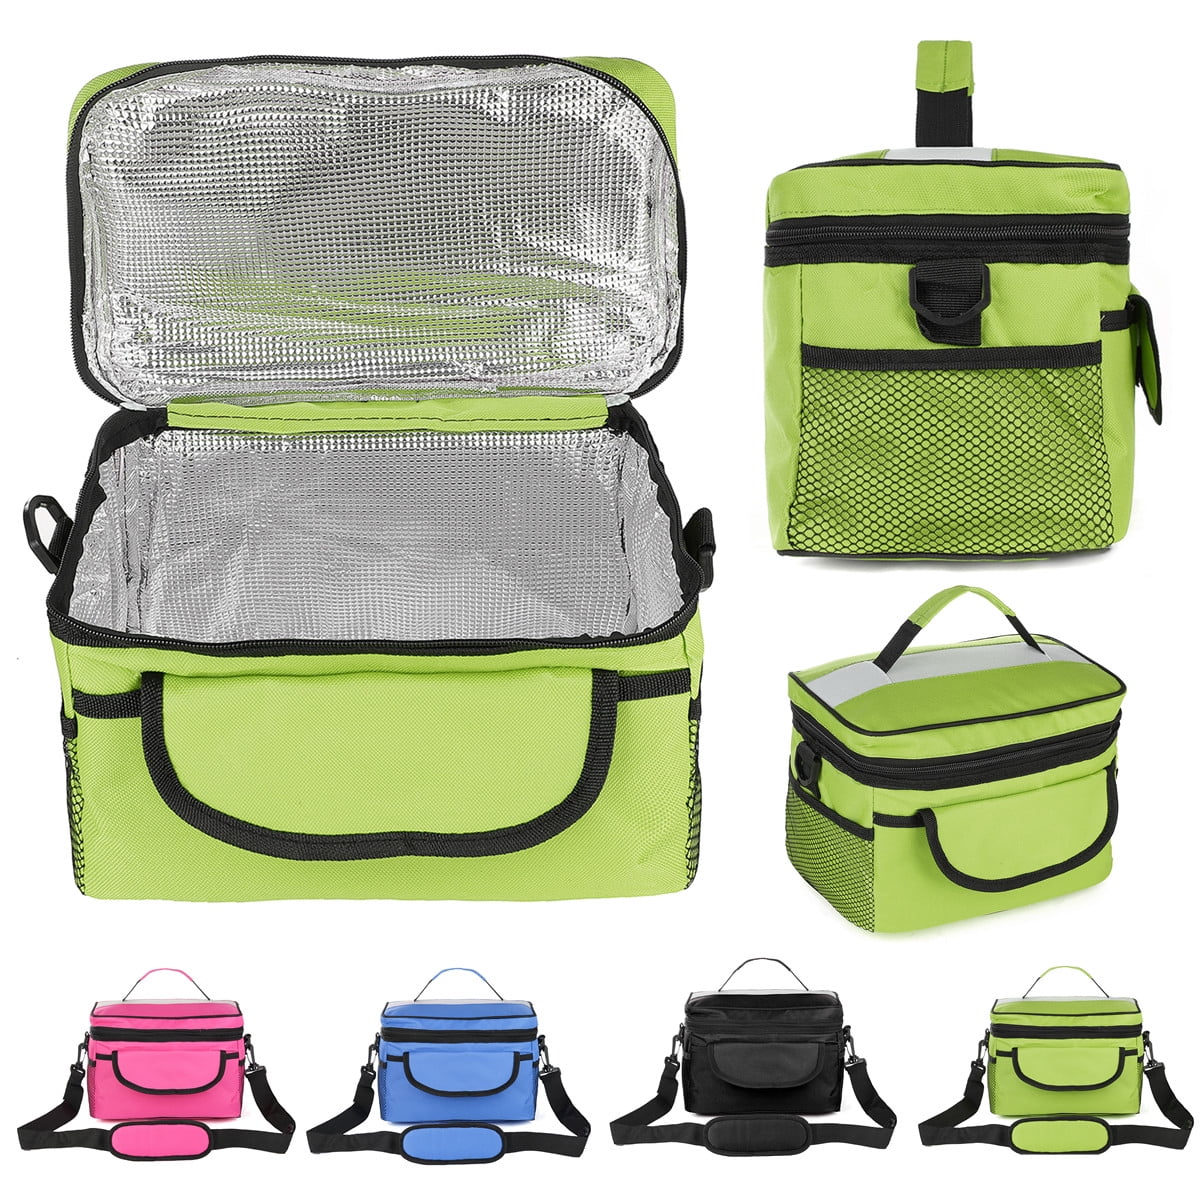 Lunch Box Bag Tote Insulated Food Cooler Outdoor Camping Picnic Beach Travel 